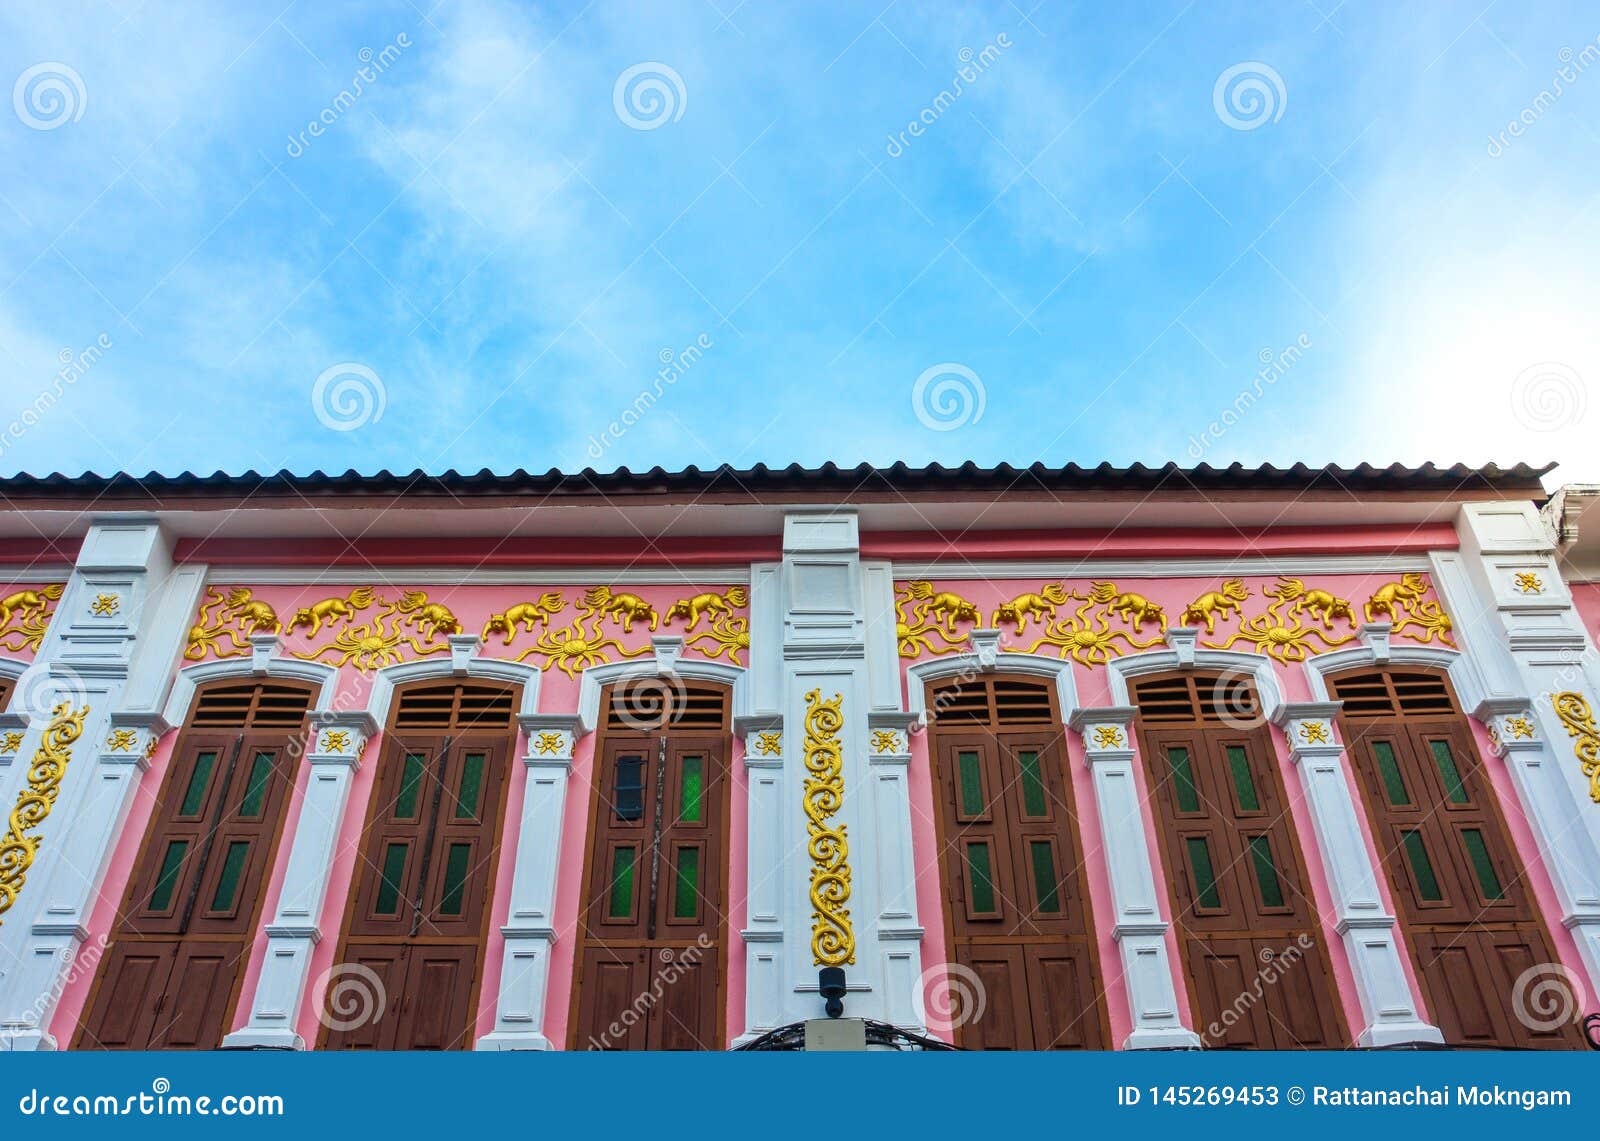 window with pink background in chino-portuguese style, old town, phuket, thailand